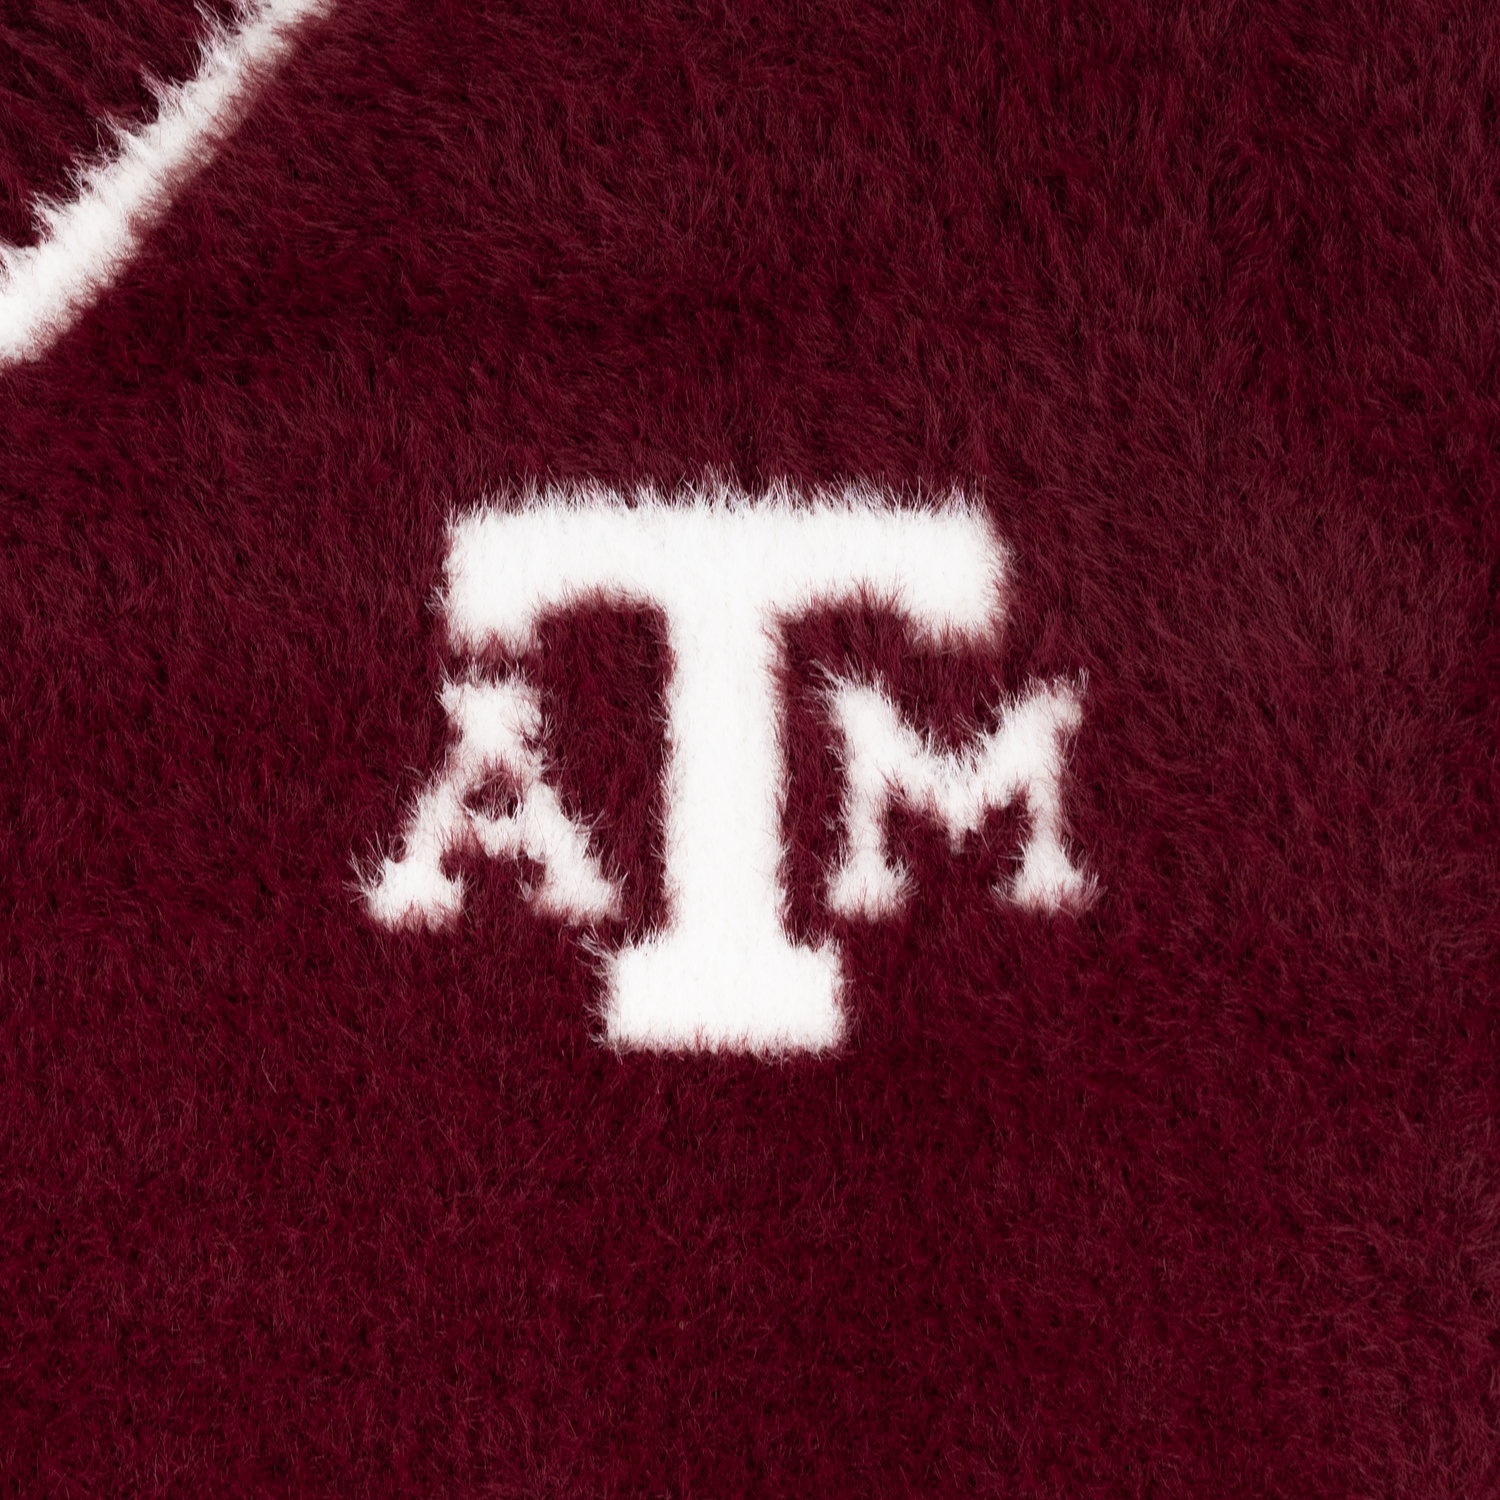 Texas A&M Her Intarsia V Neck Sweater